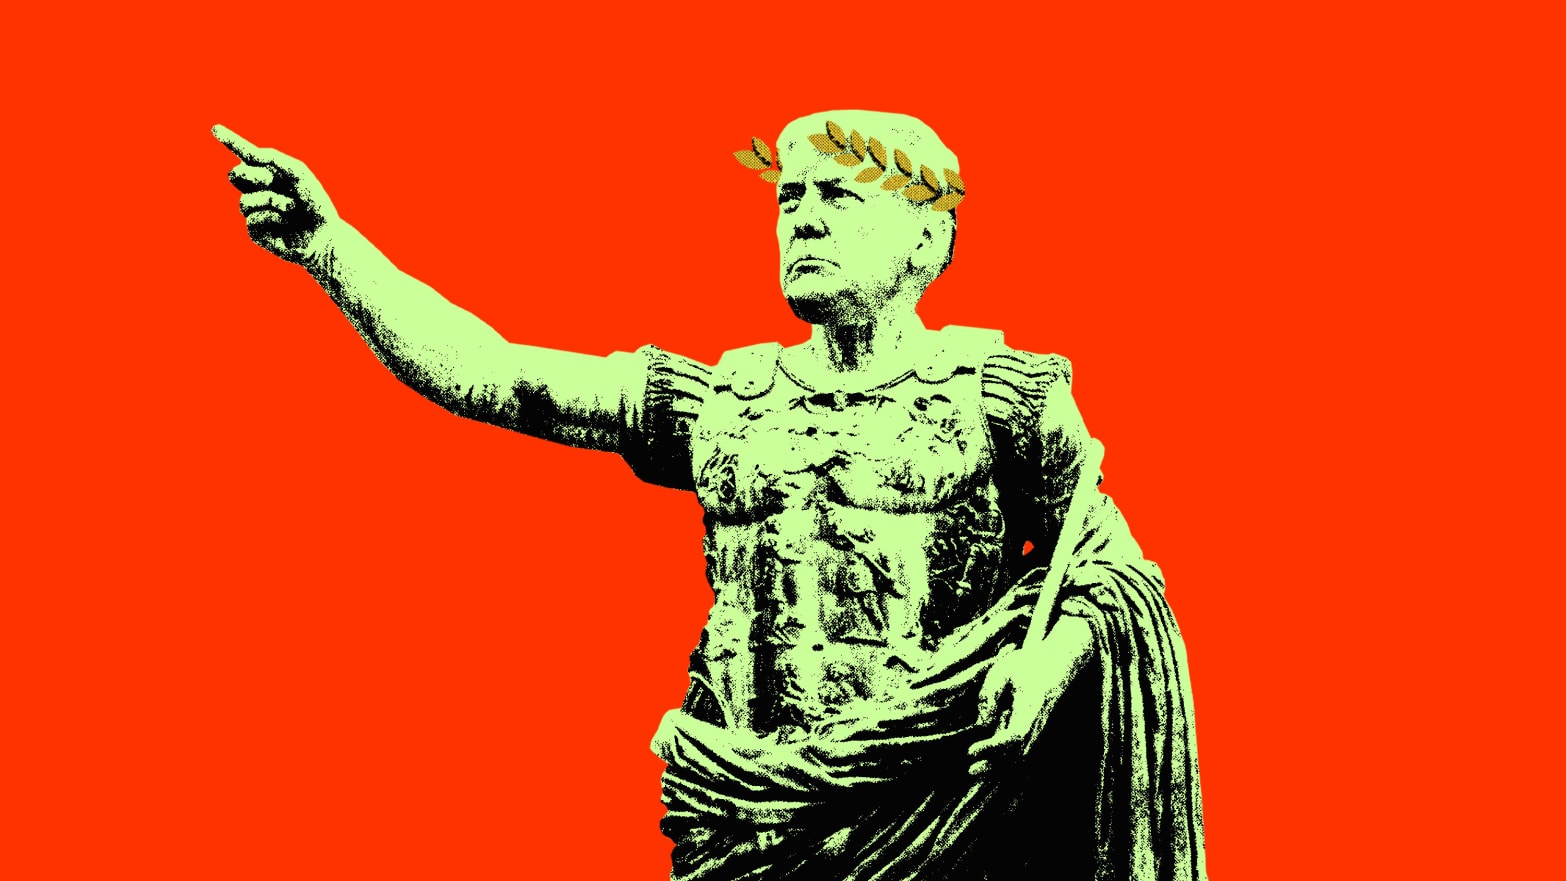 A photo illustration shows Donald Trump's head on a statue of Julius Ceasar